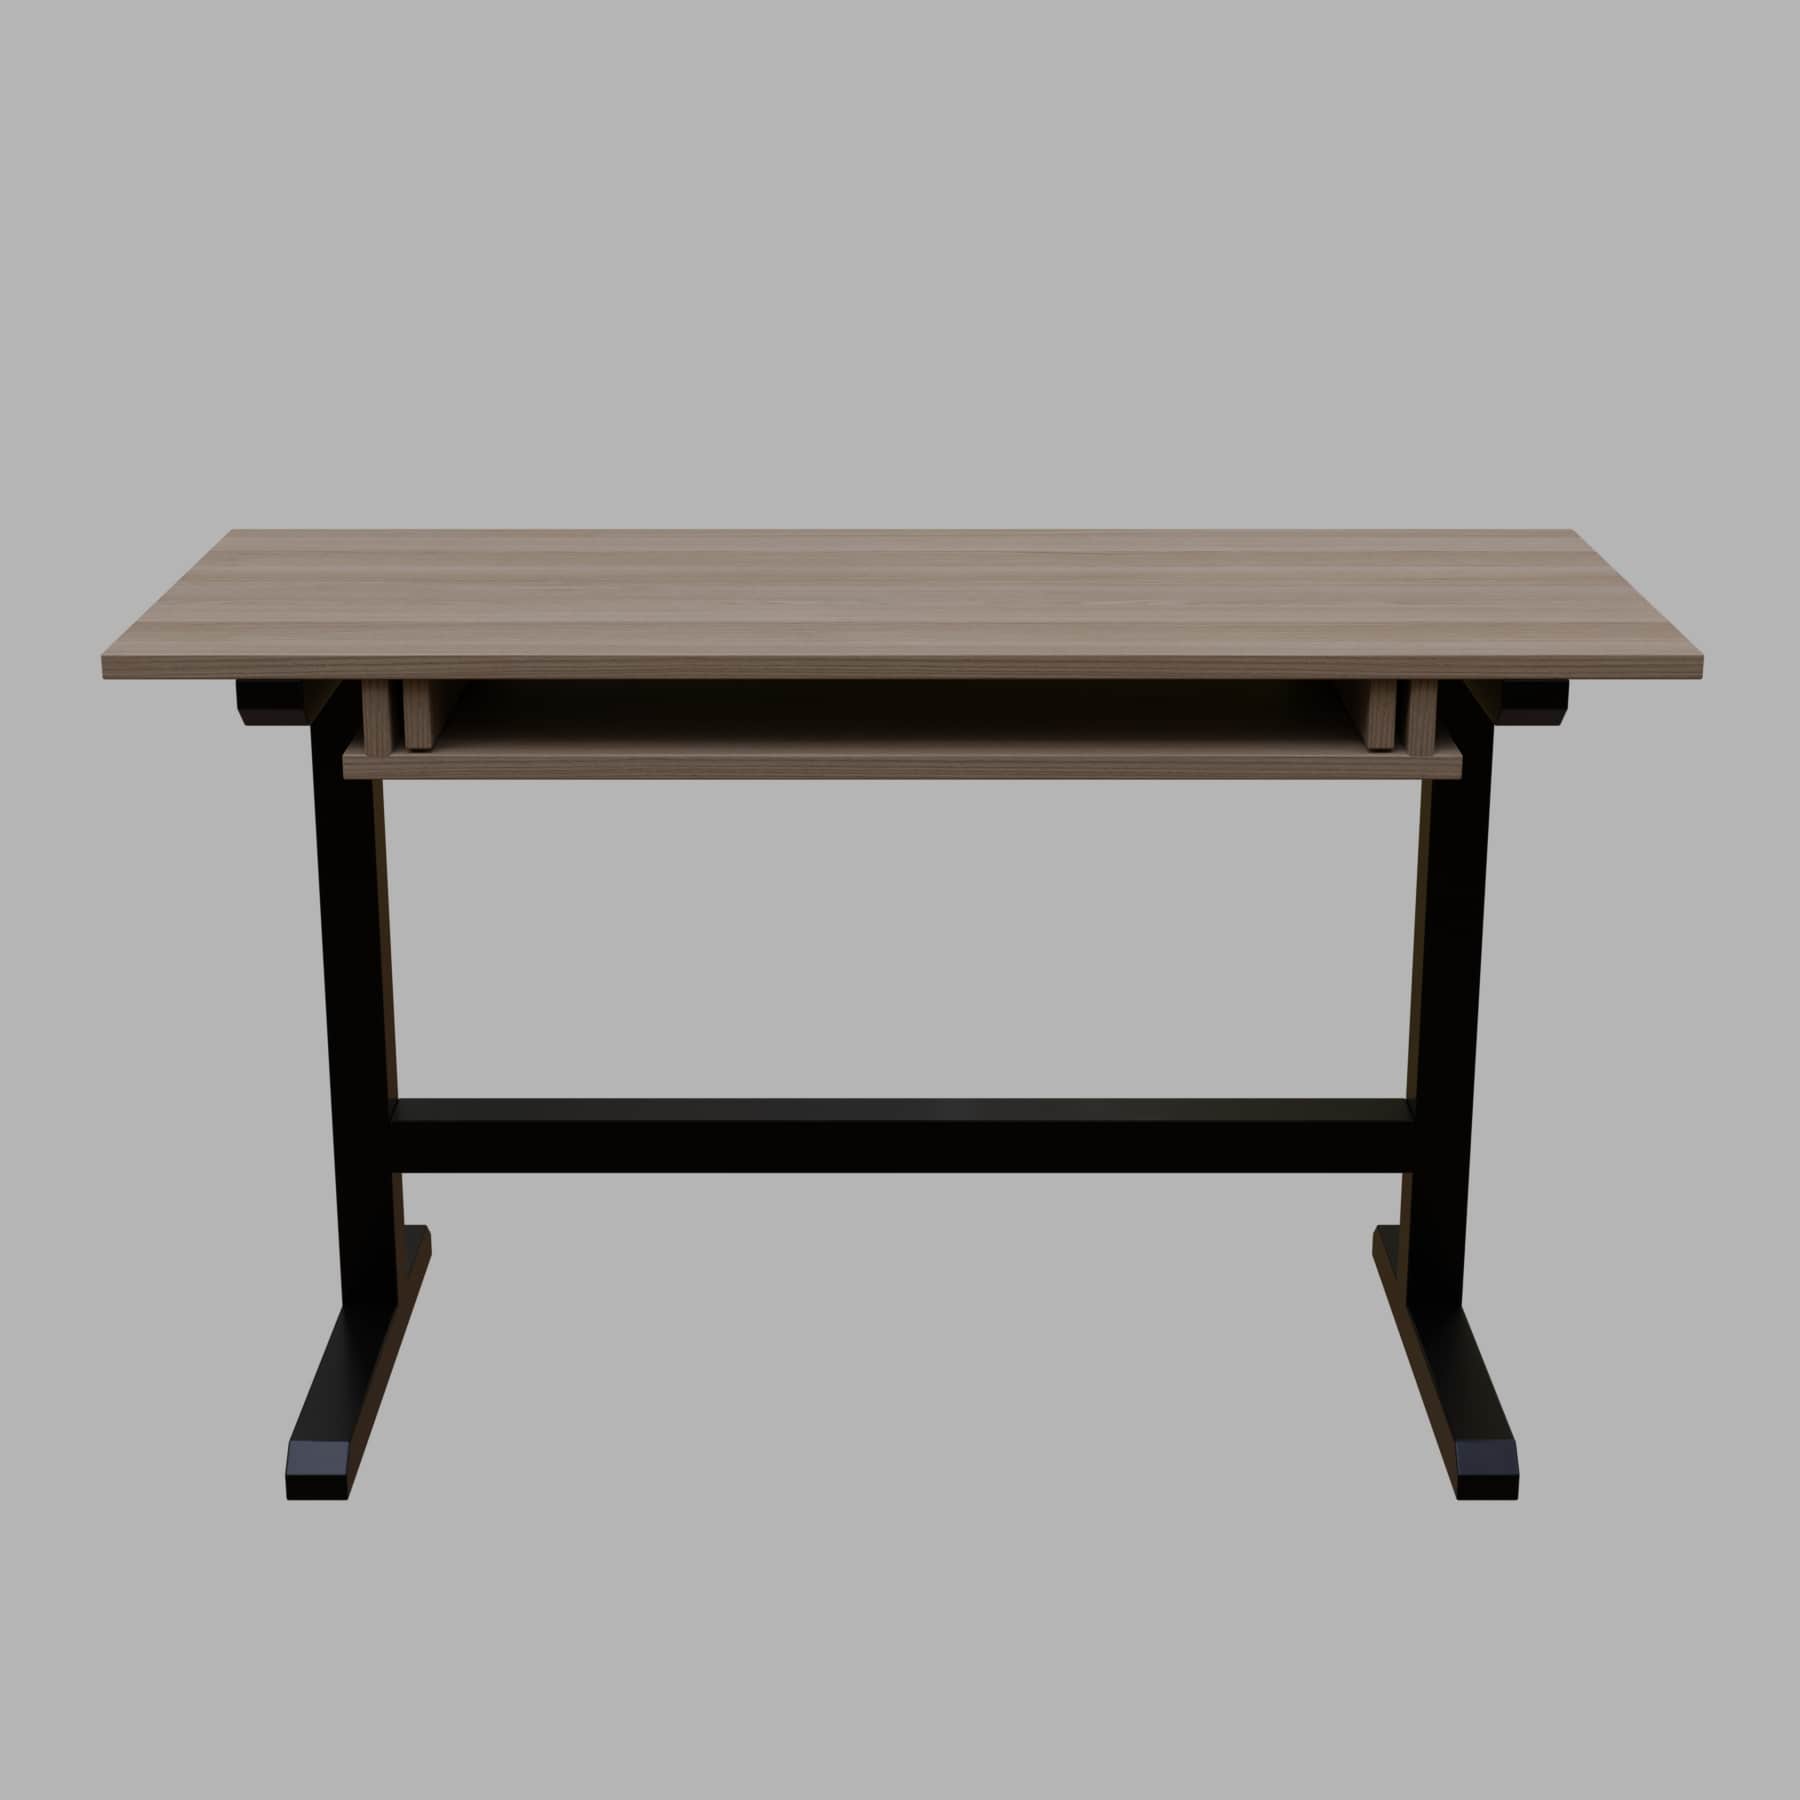 Zinnia Study Table with Keyboard Tray in Wenge Color